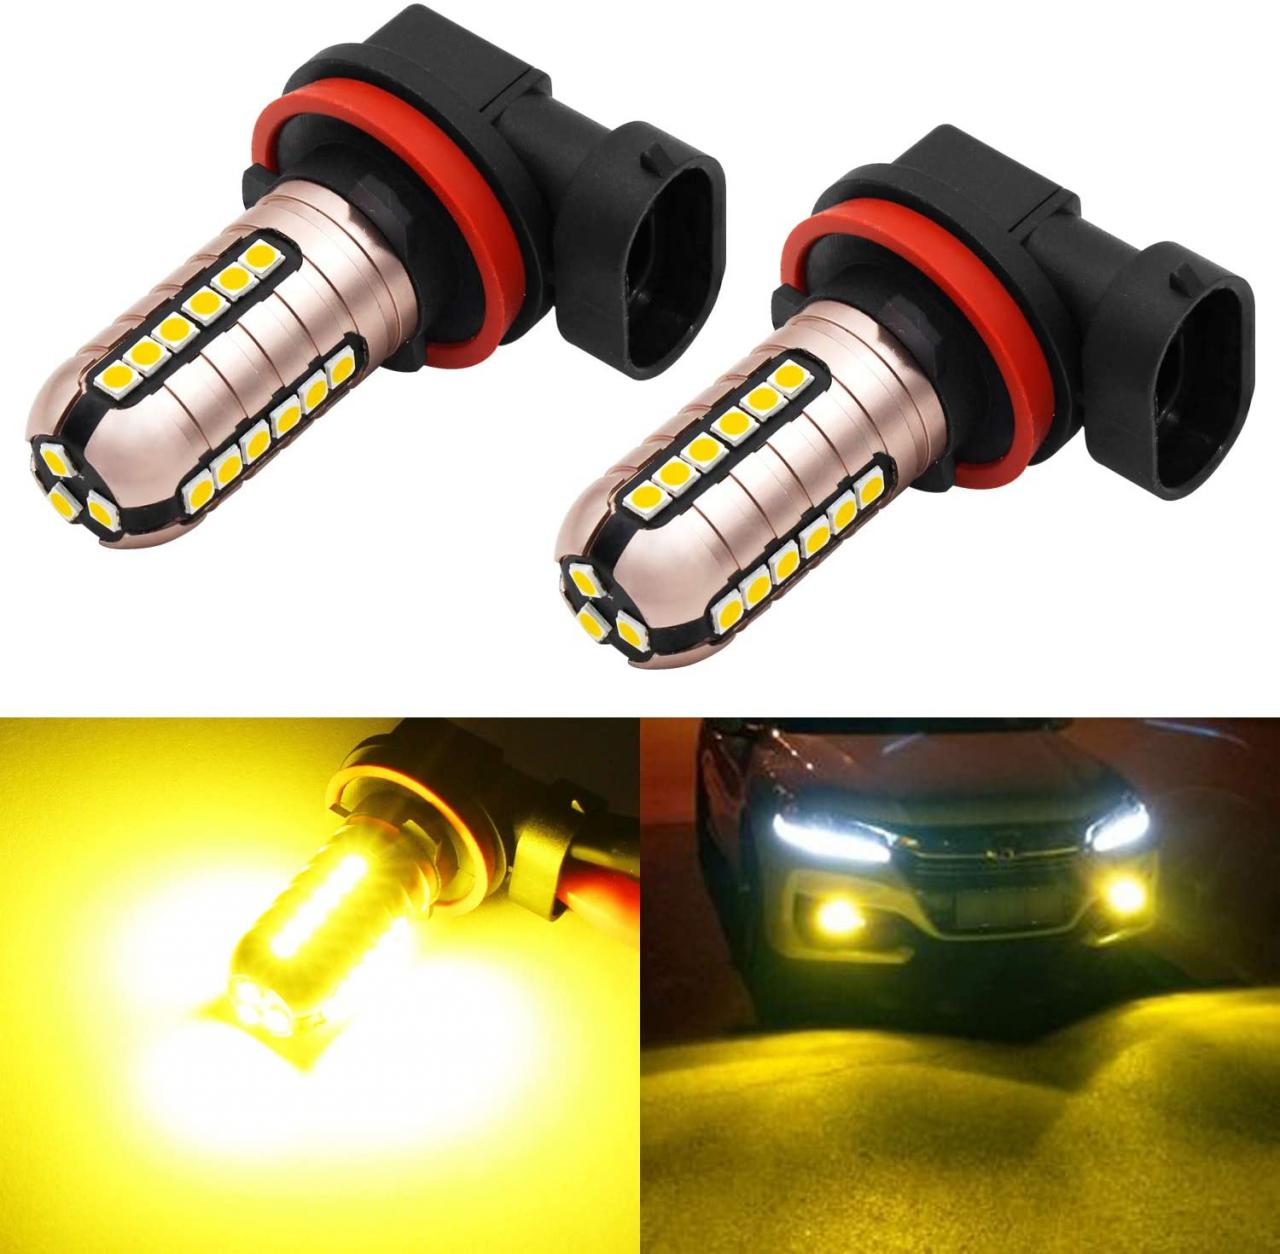 Buy Phinlion 3000 Lumens Golden Yellow H11 LED Fog Light Bulbs Super Bright  3030 27-SMD H8 H16 LED Bulb Replacement for DRL or Fog Lamps, 3000K Yellow  Online in Taiwan. B07YWG1WYX